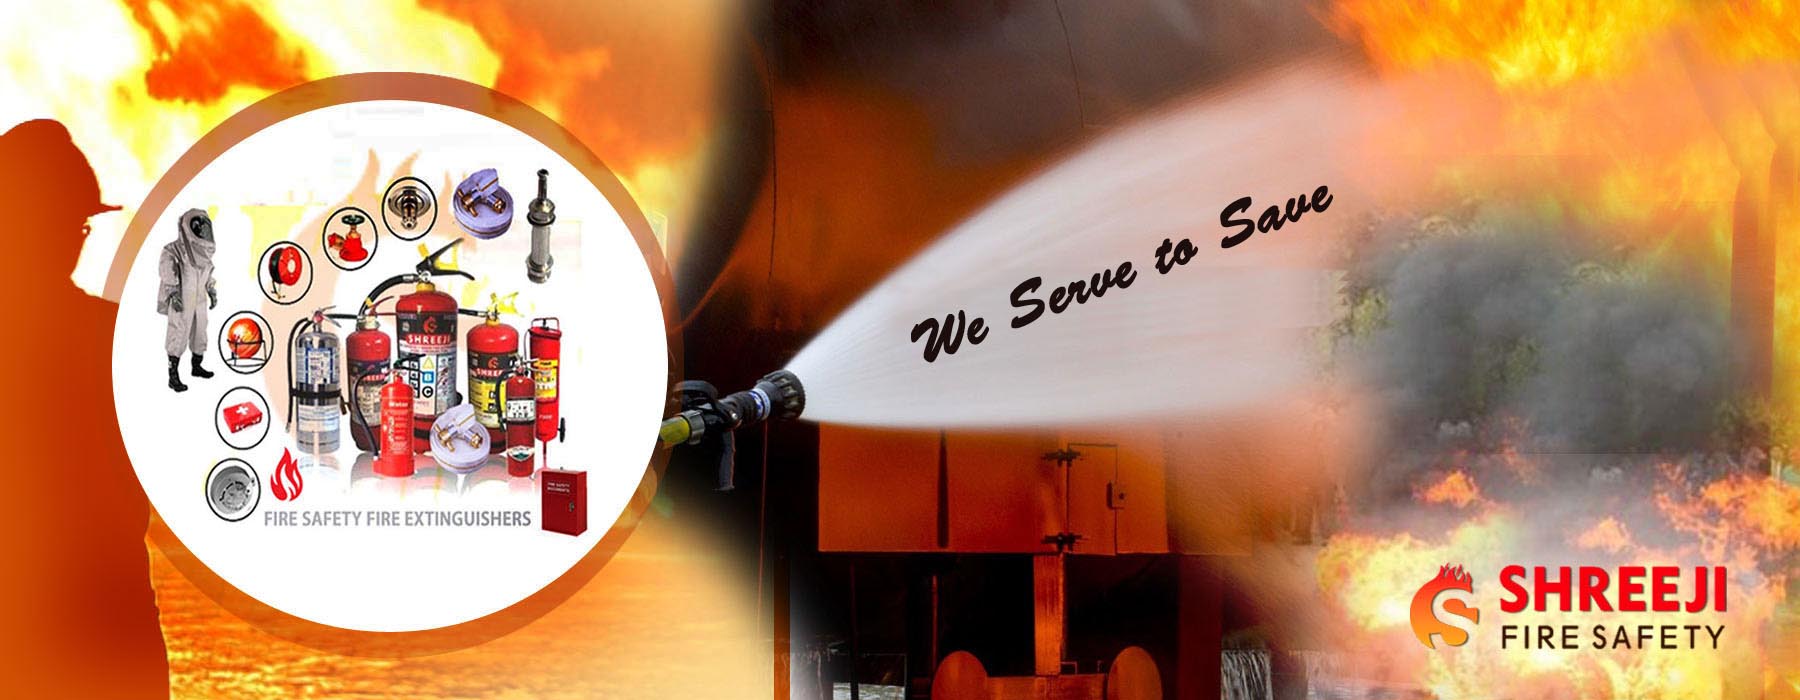 Fire Extinguishers - Hydrant Valve Hose System Manufactures Gujarat- India